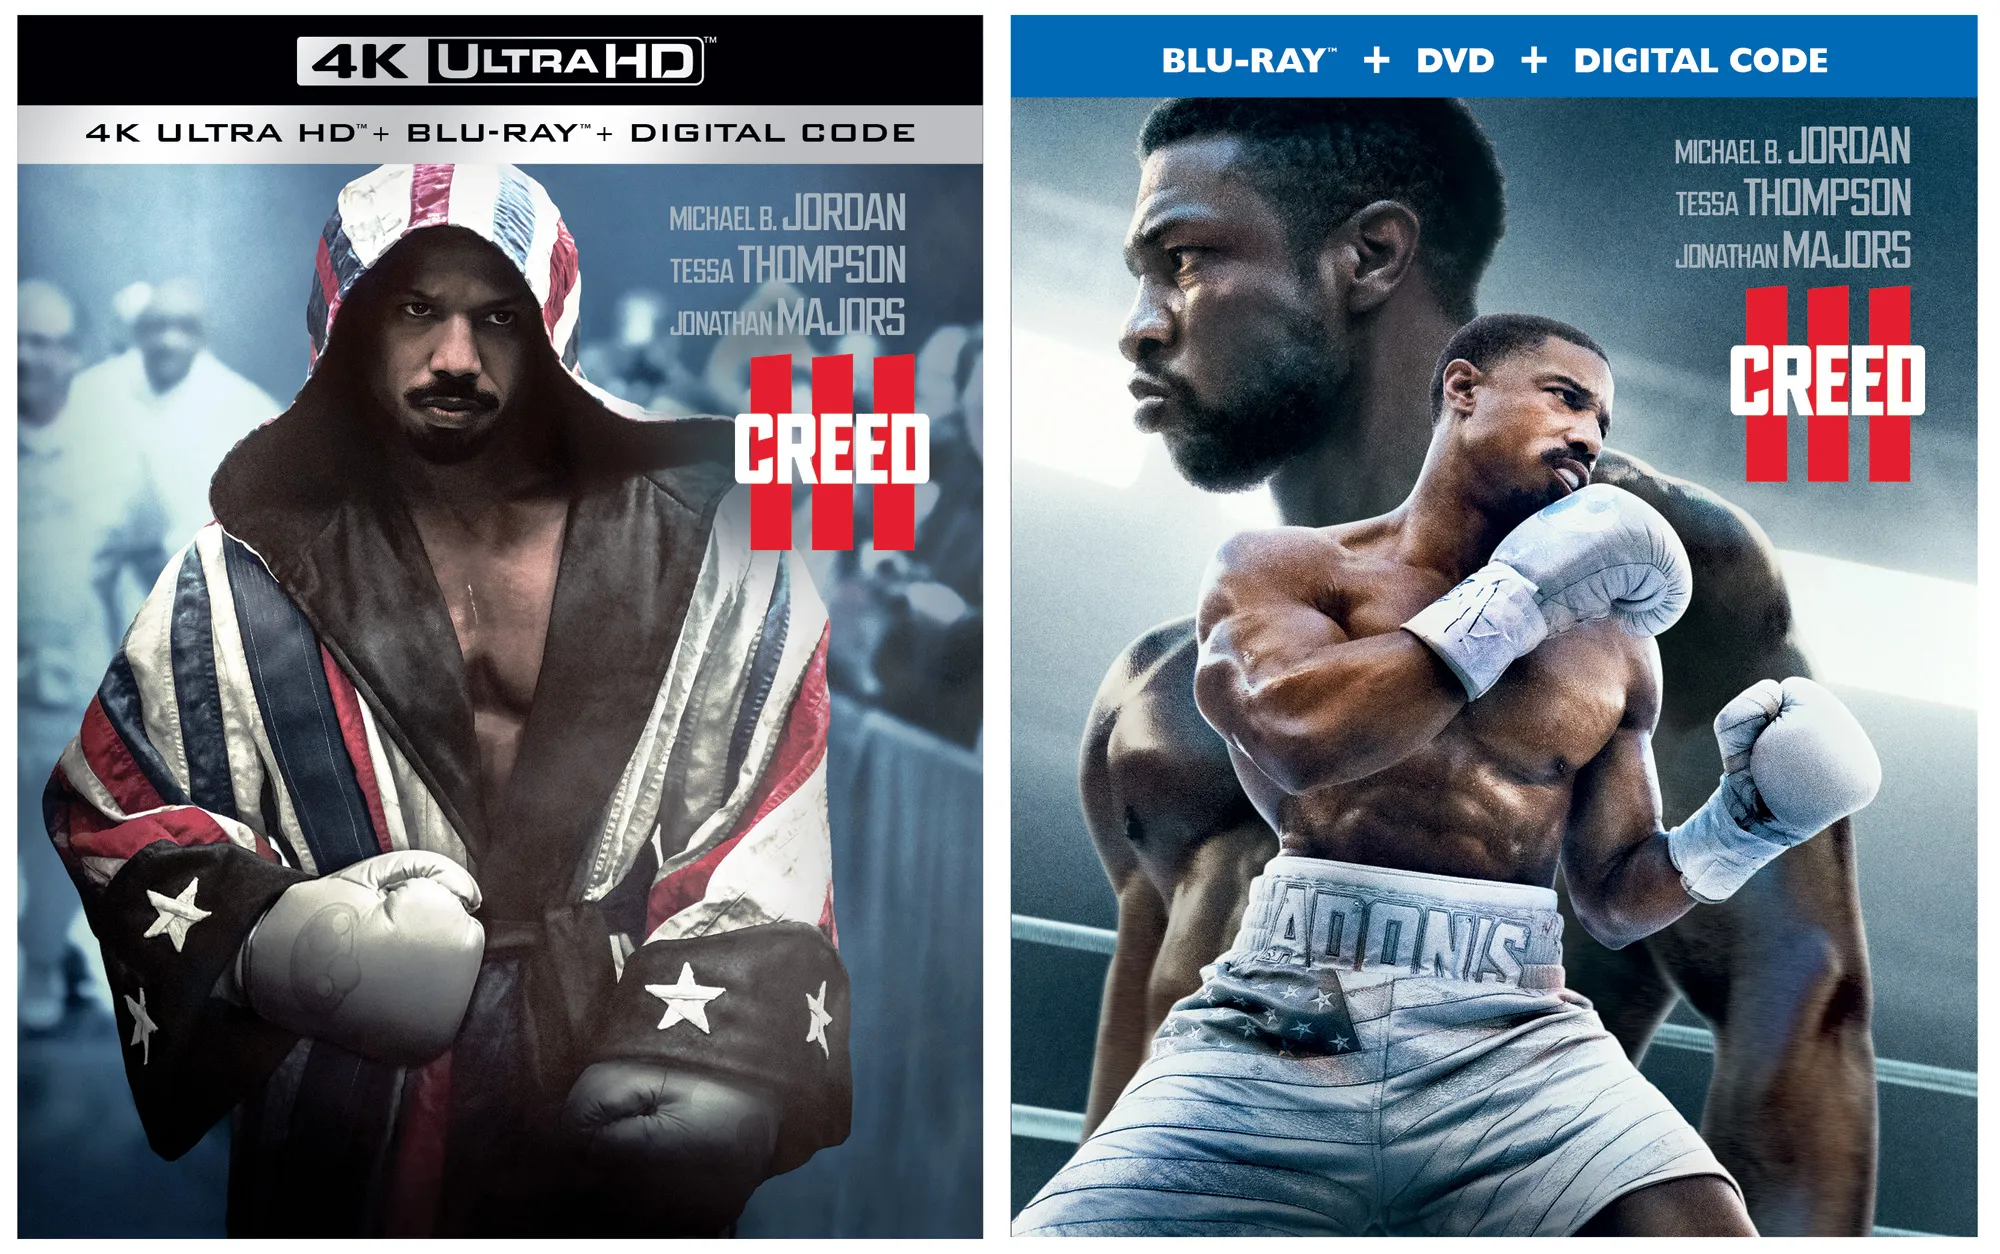 'Creed III' 4K, Blu-ray, DVD Release Date and Details